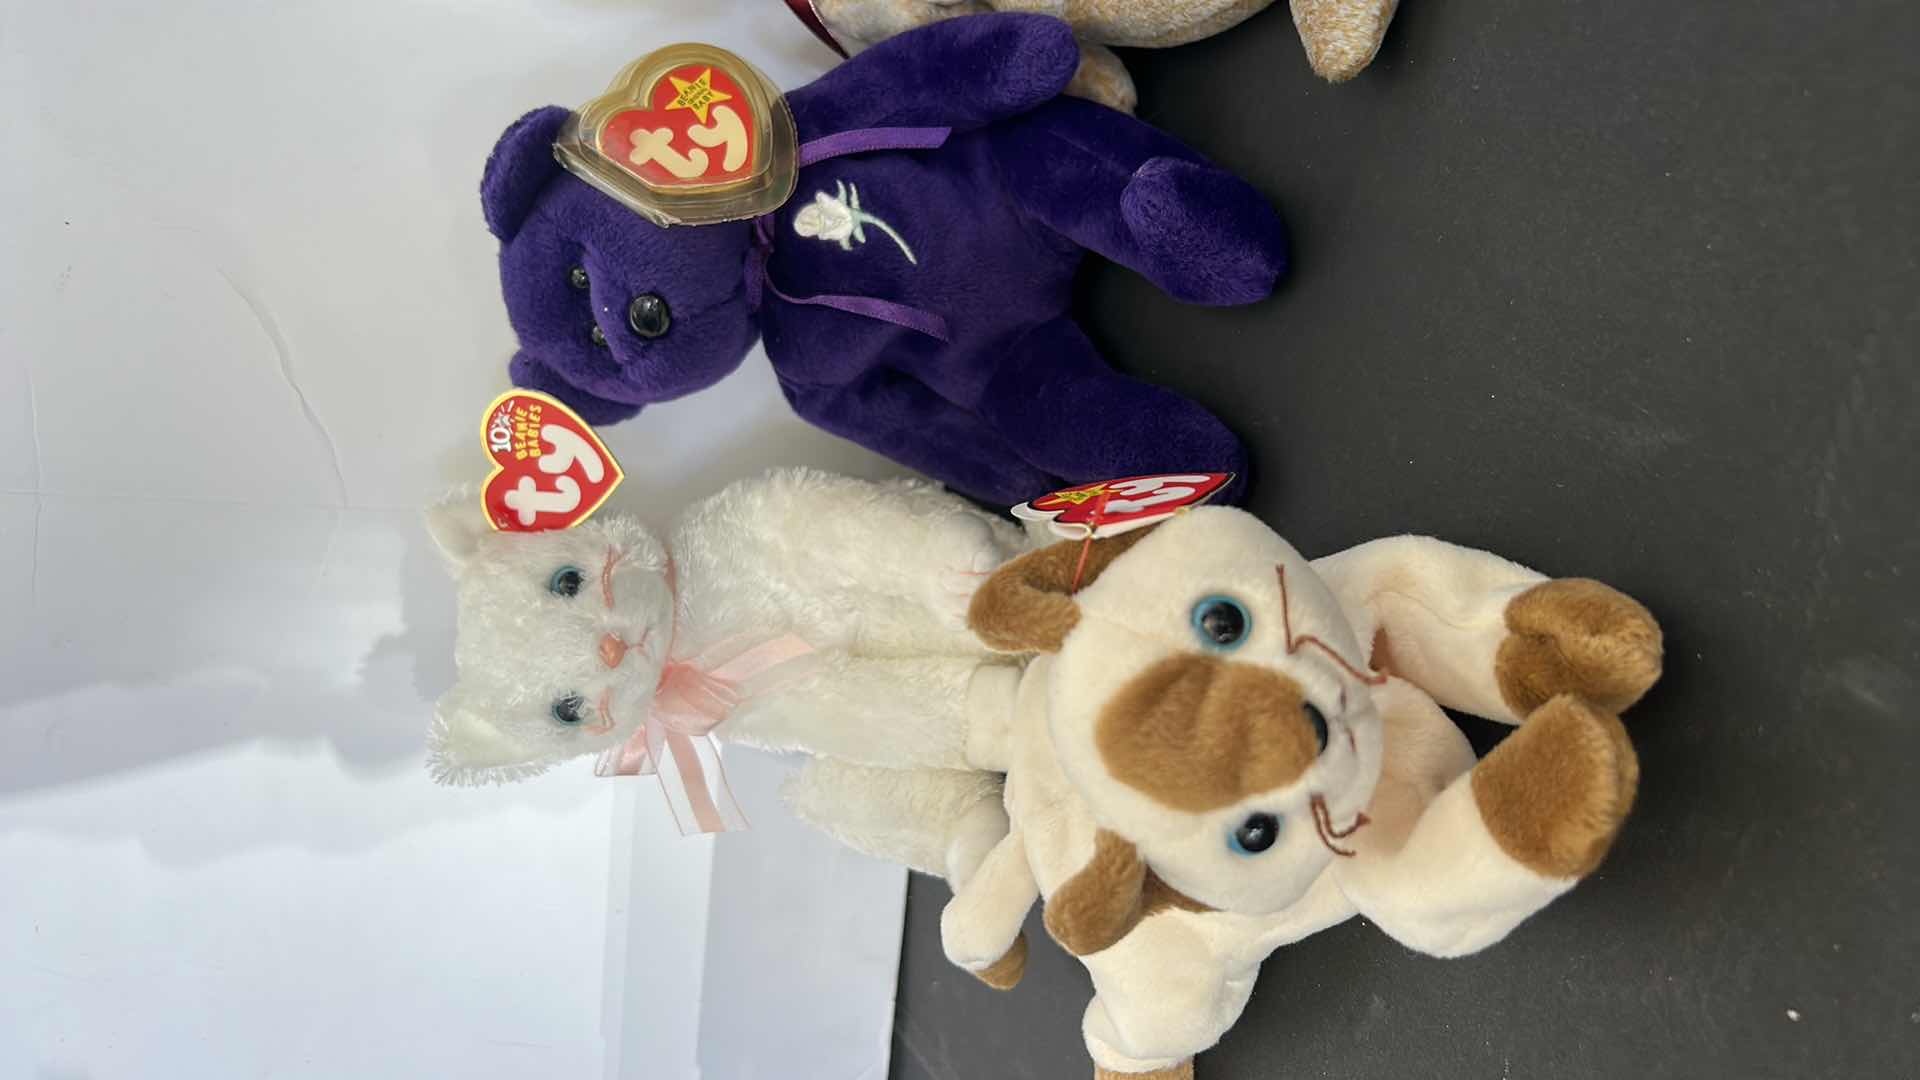 Photo 2 of 8 COLLECTIBLE BEANIE BABIES INCLUDES RARE PRINCESS BEANIE BABY)